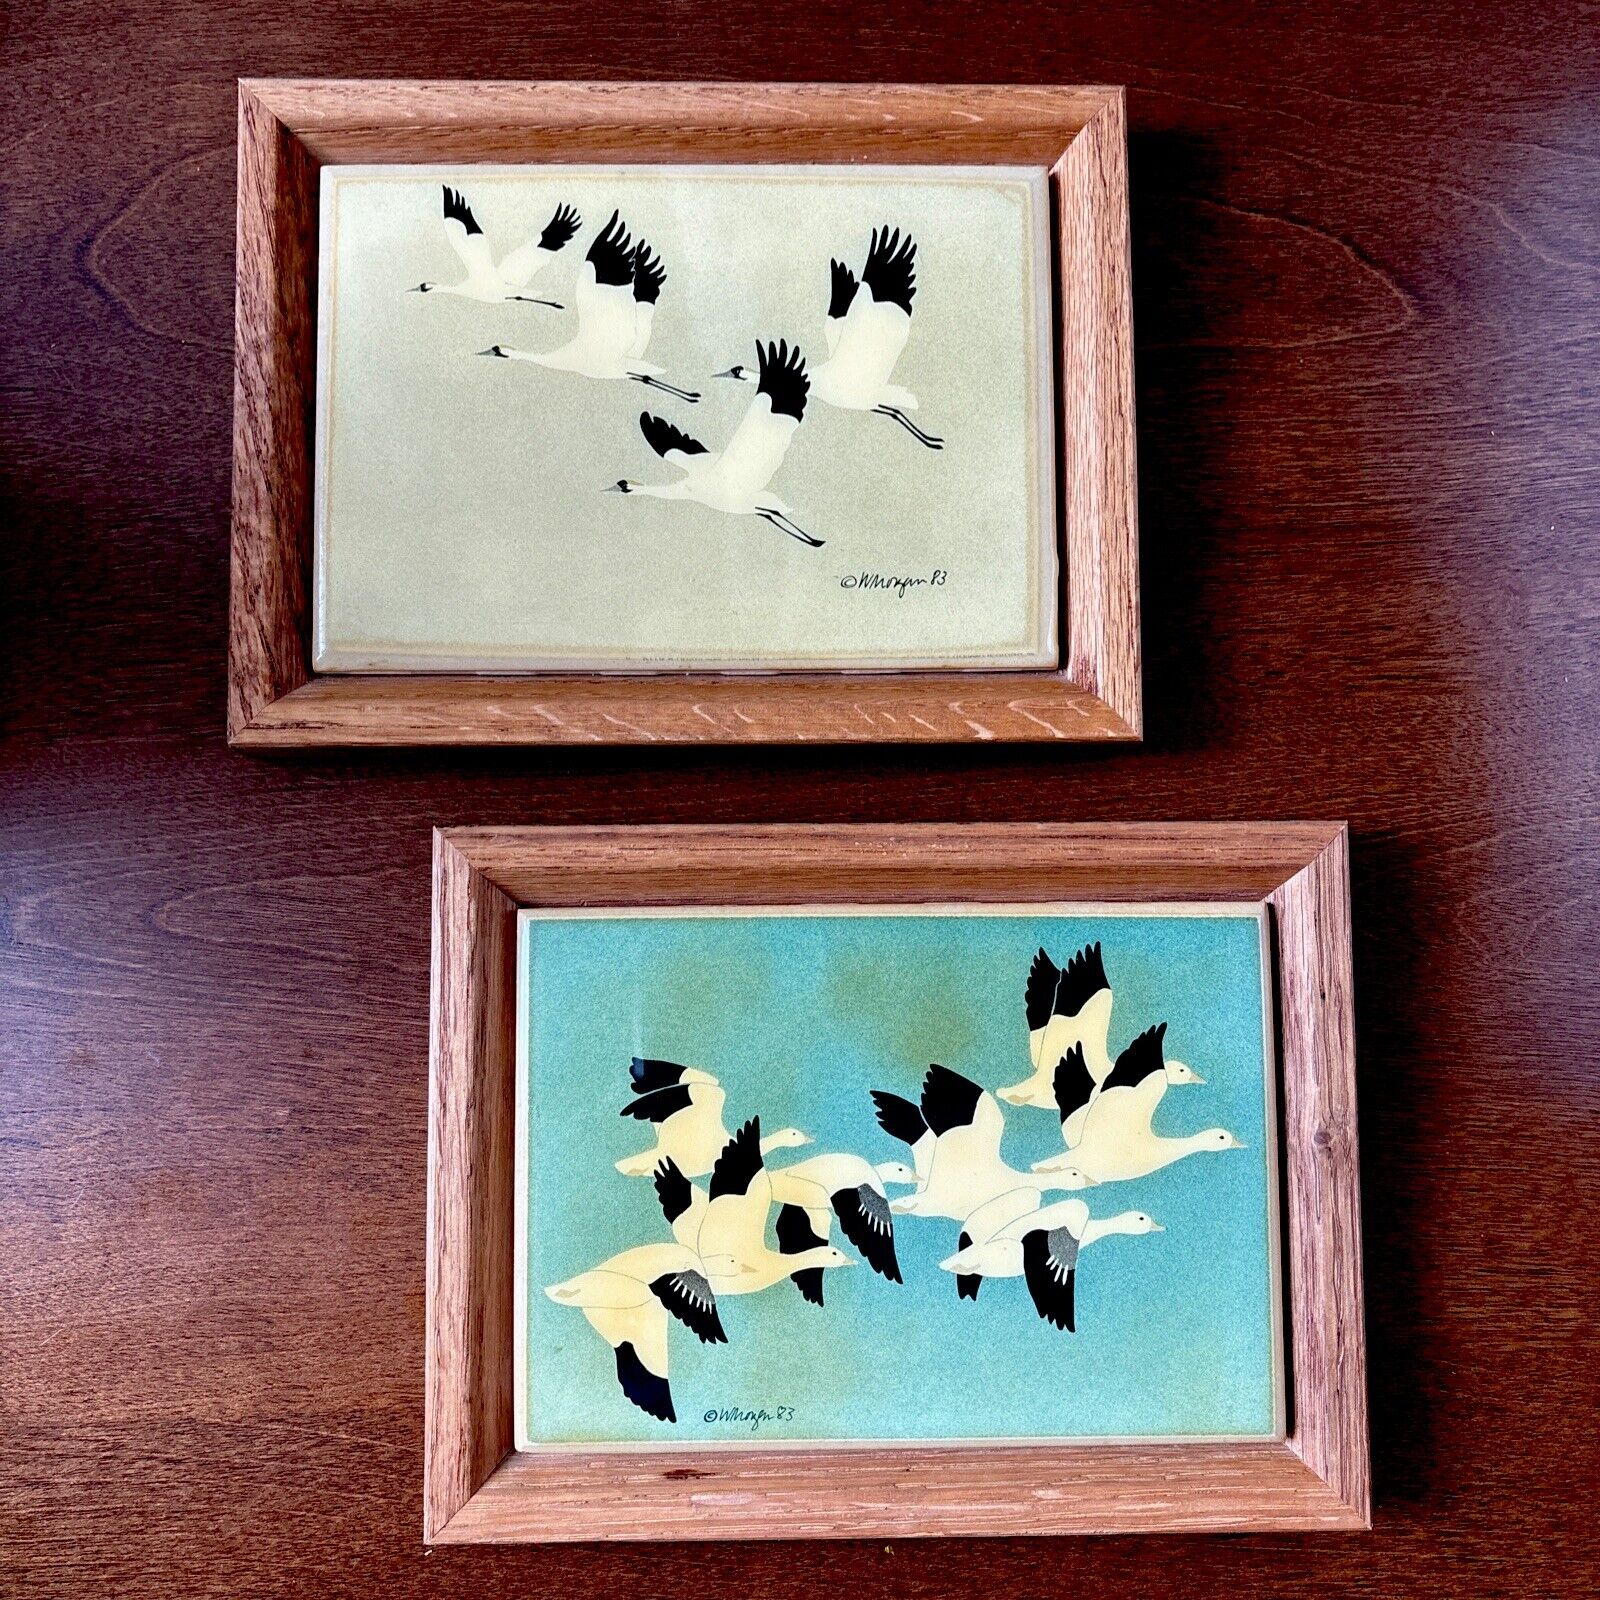 Vintage Painted & Framed Tile Trivets Geese Signed by W. Morgan 1983